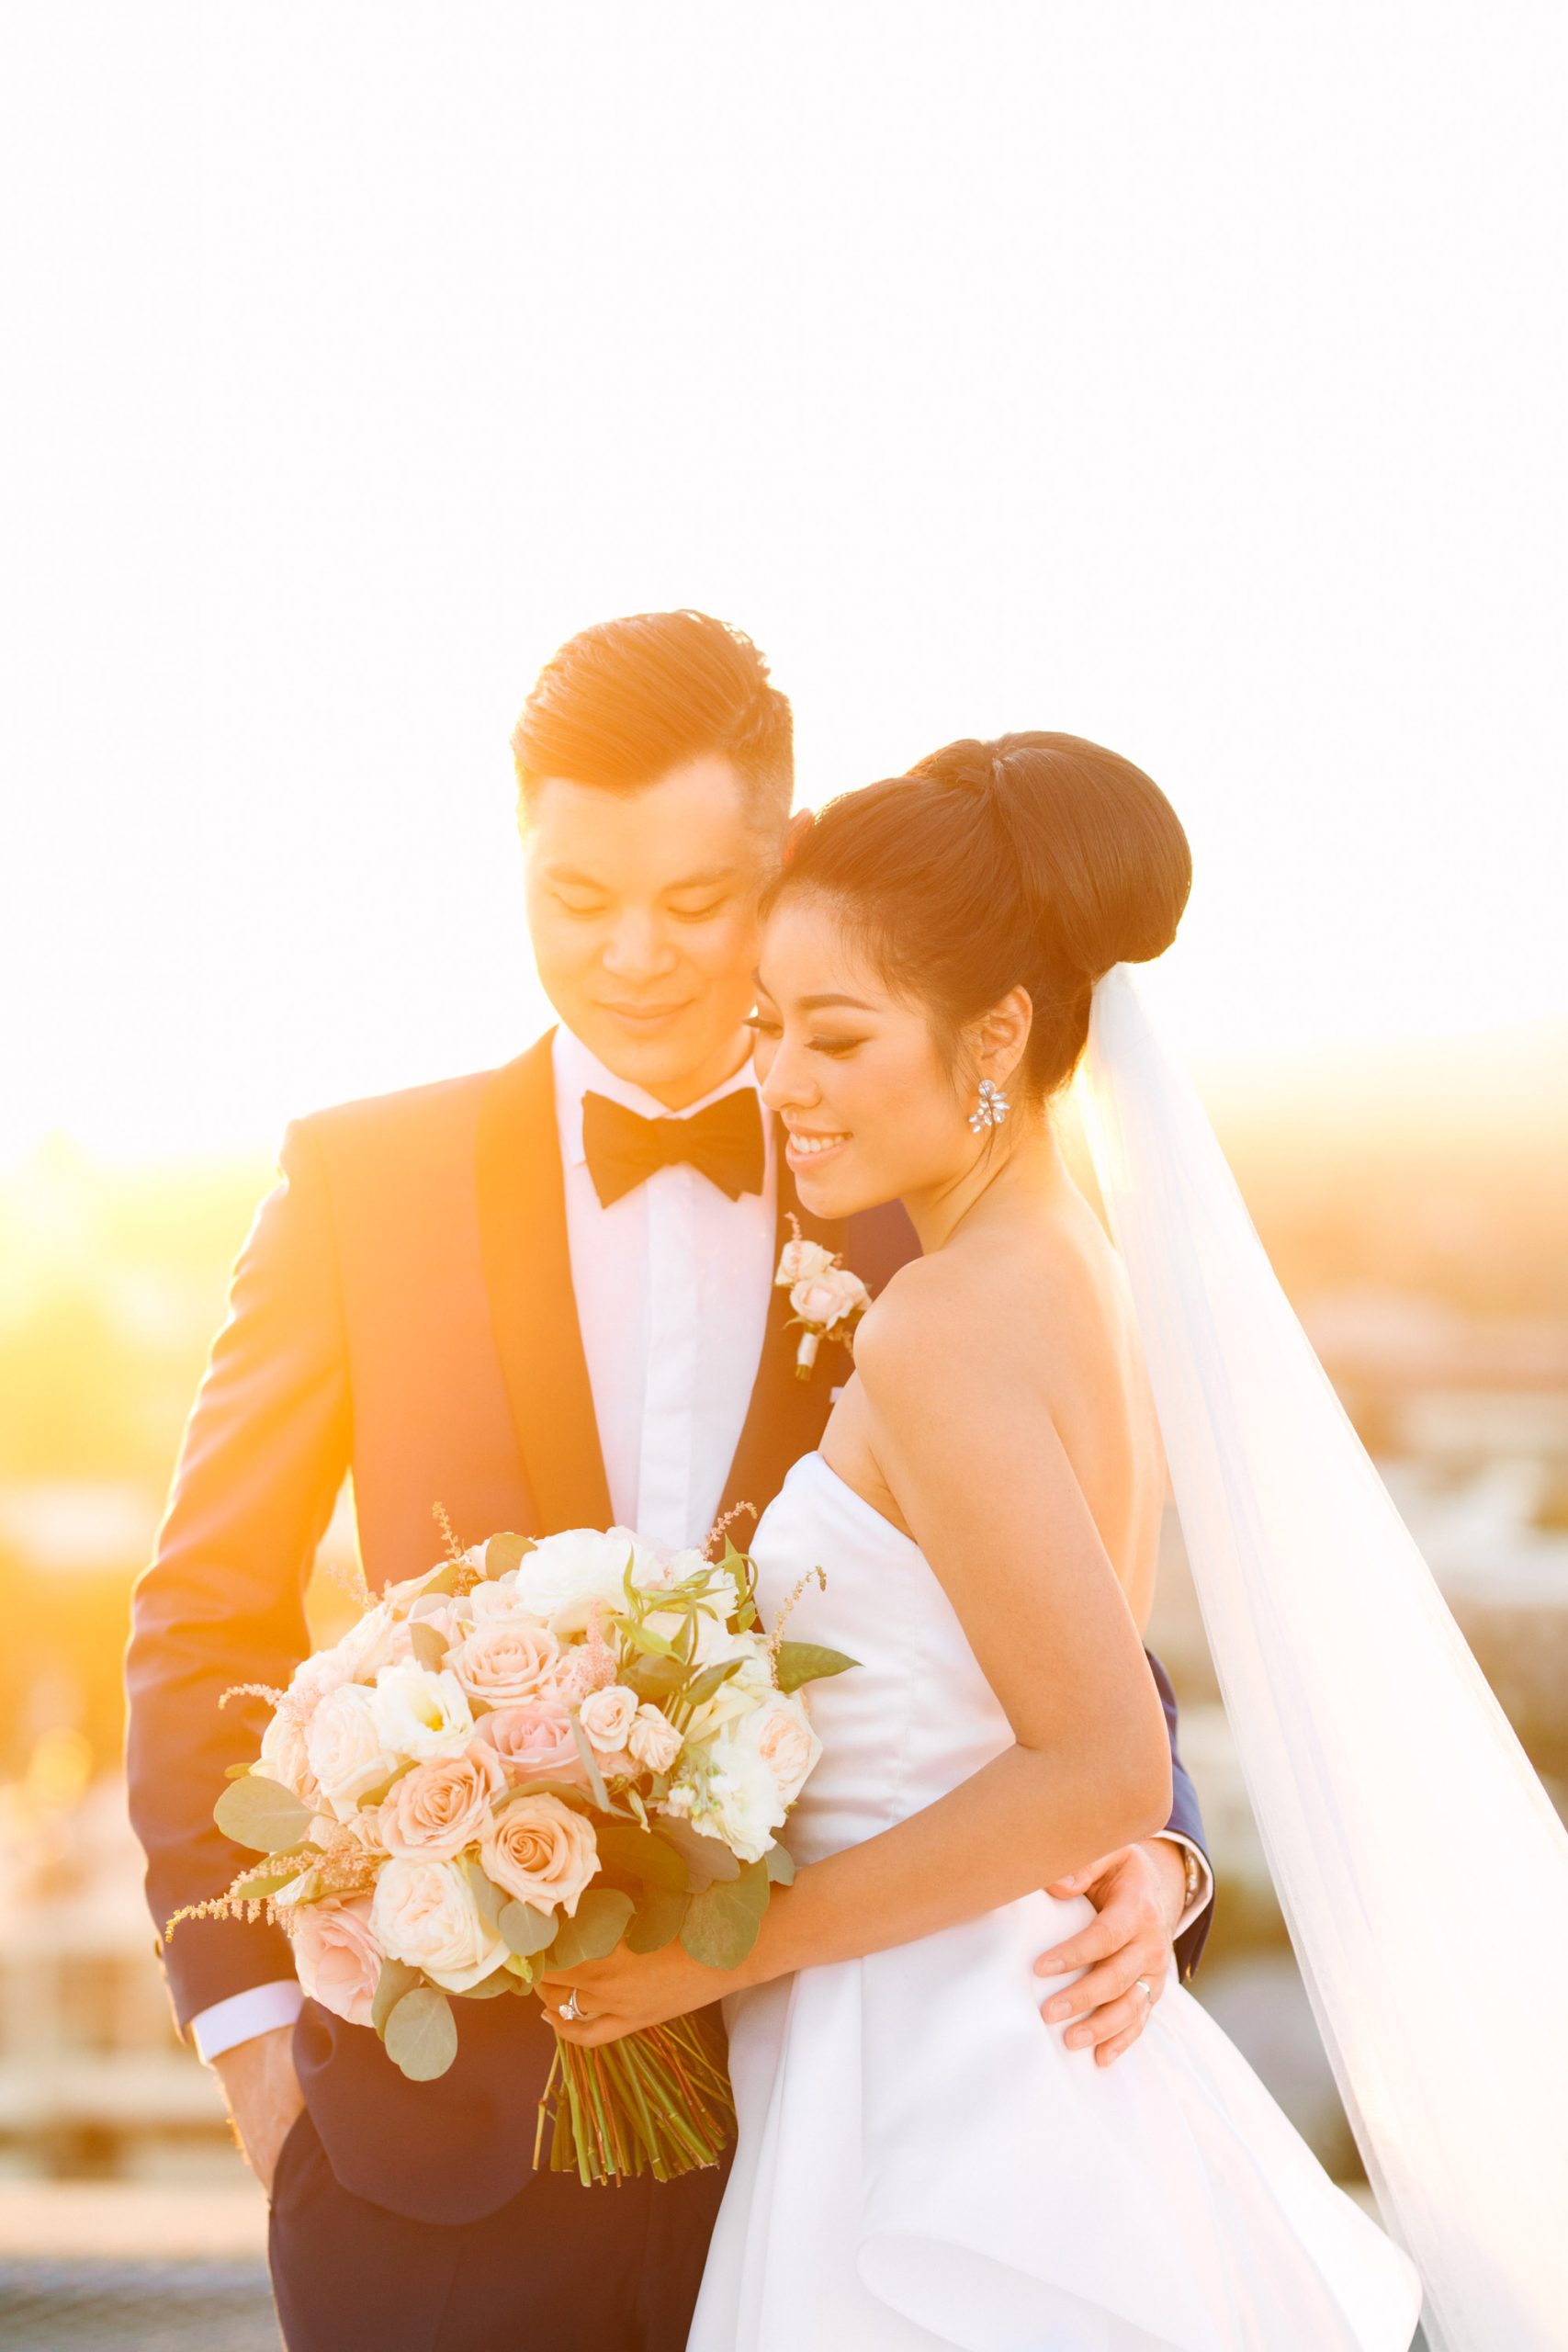 Classic wedding portrait at sunset by Mary Costa Photography